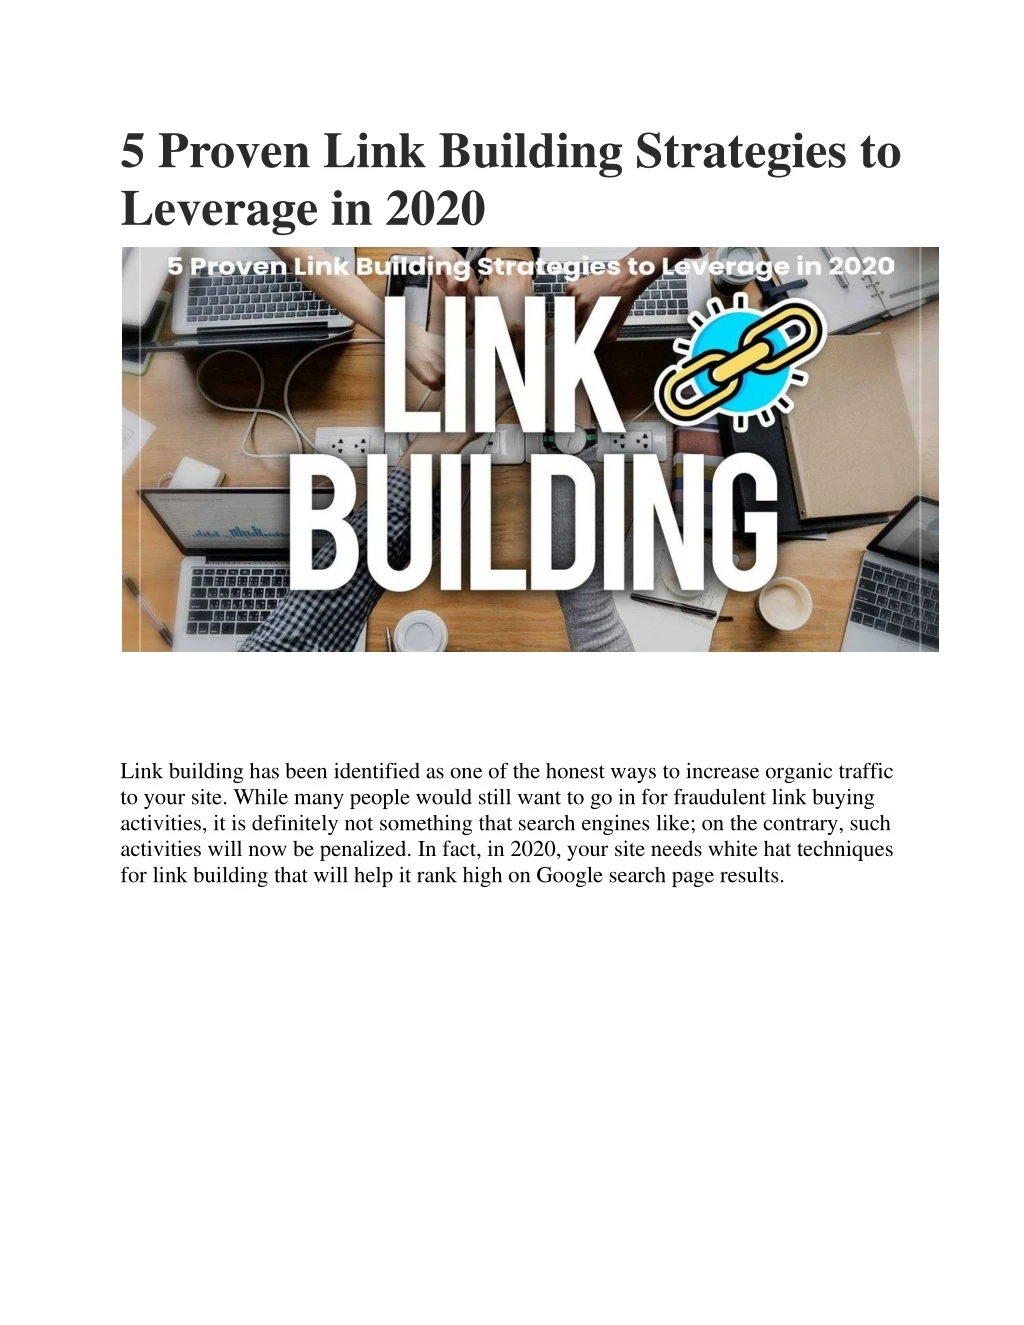 5 proven link building strategies to leverage